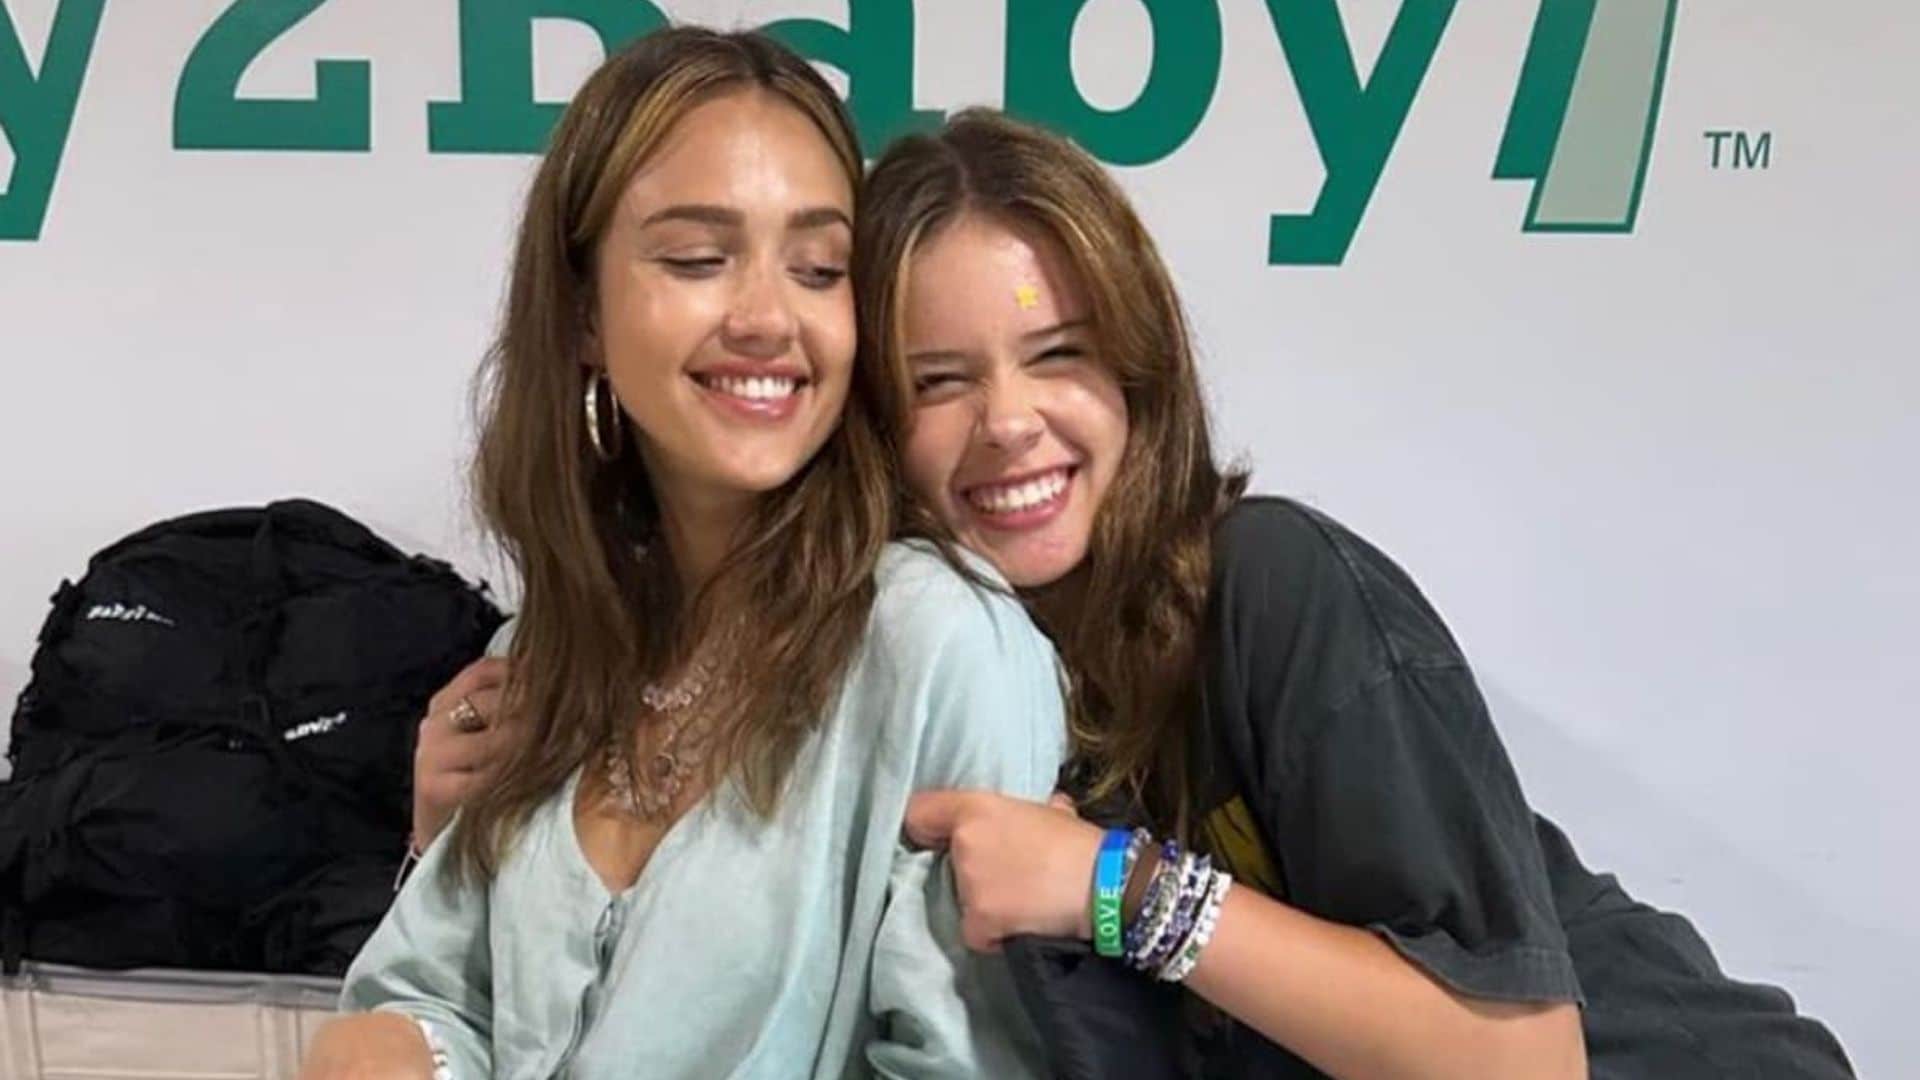 Jessica Alba opens up about parenting struggles with her daughter before therapy: ‘I’m not perfect’